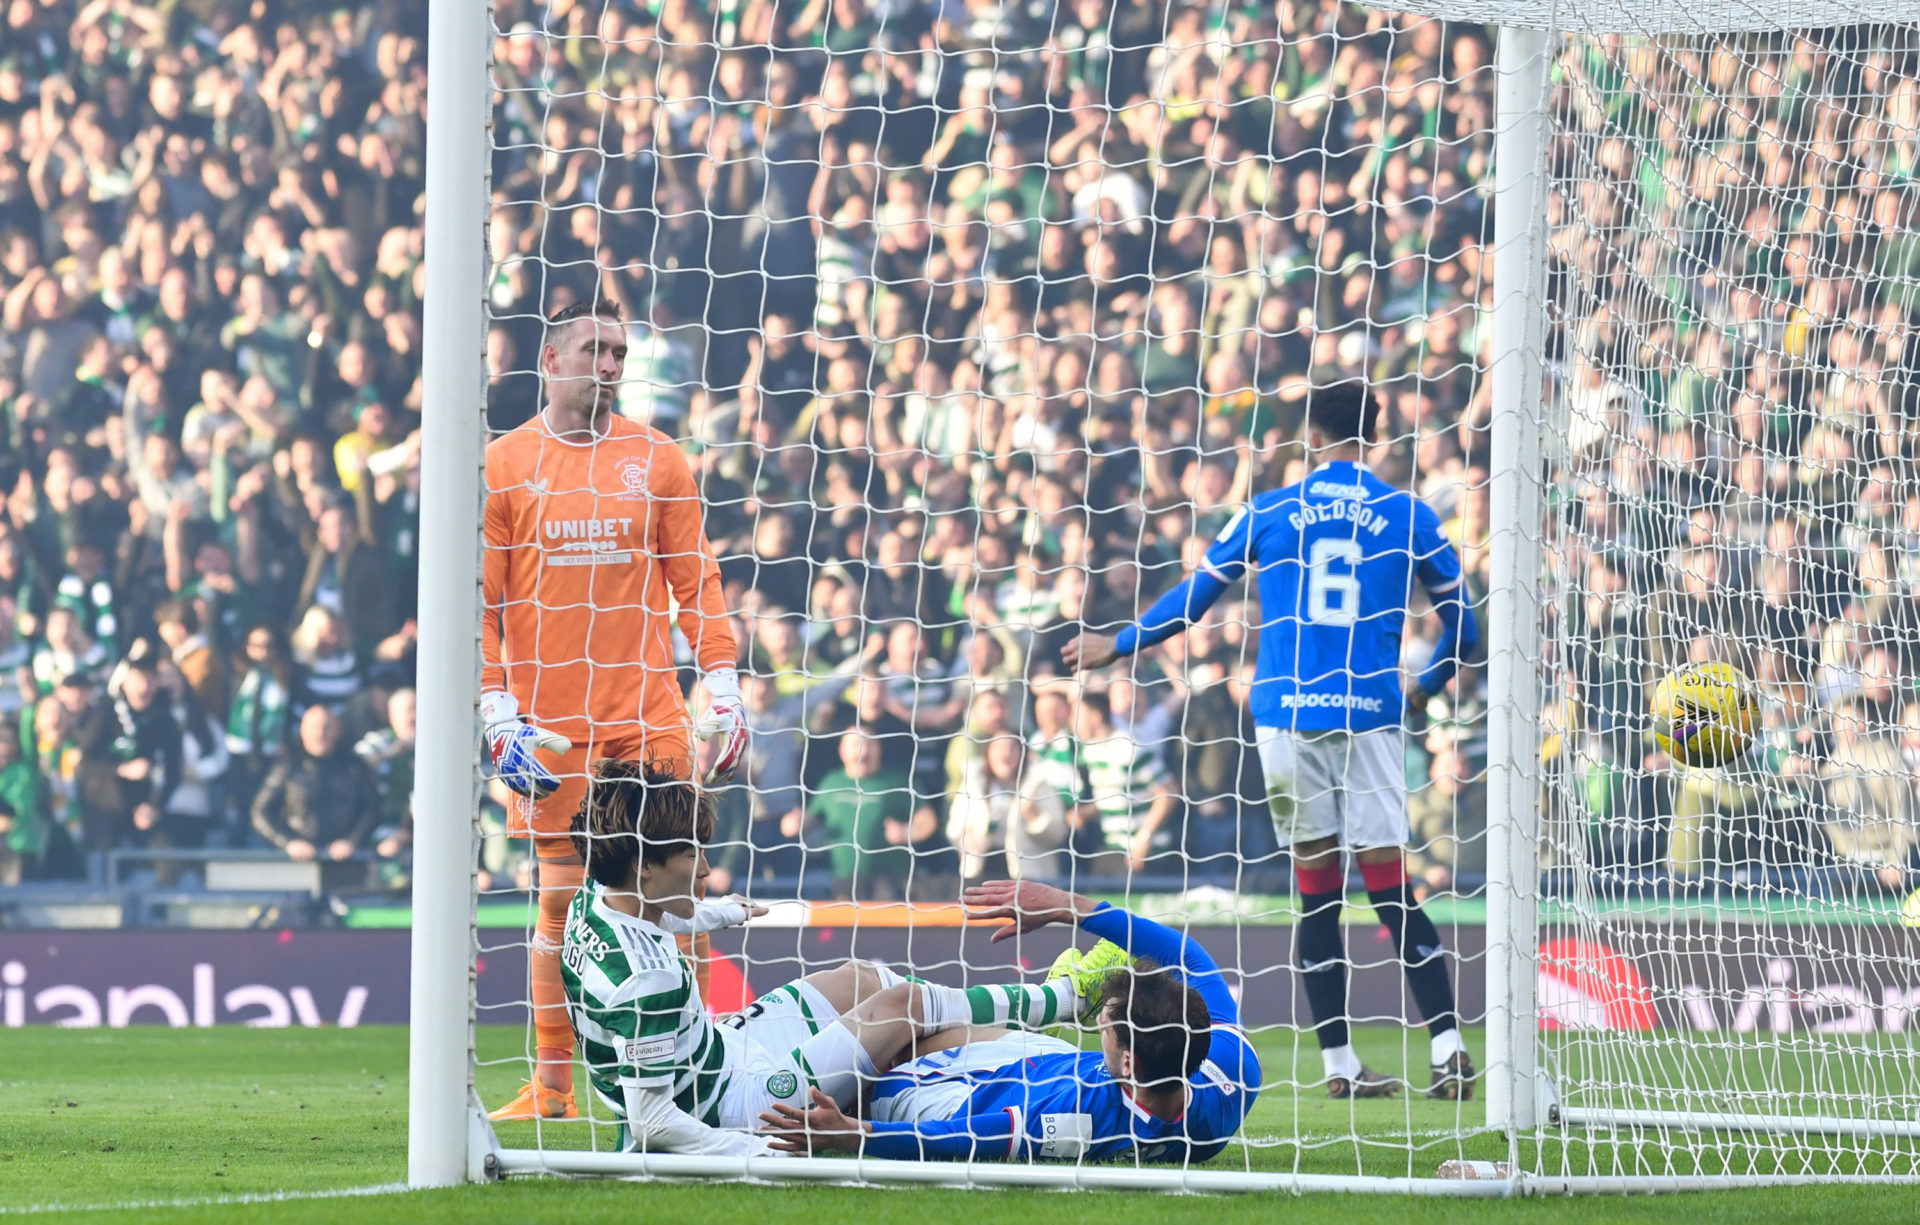 Celtic came out on top last time against Rangers